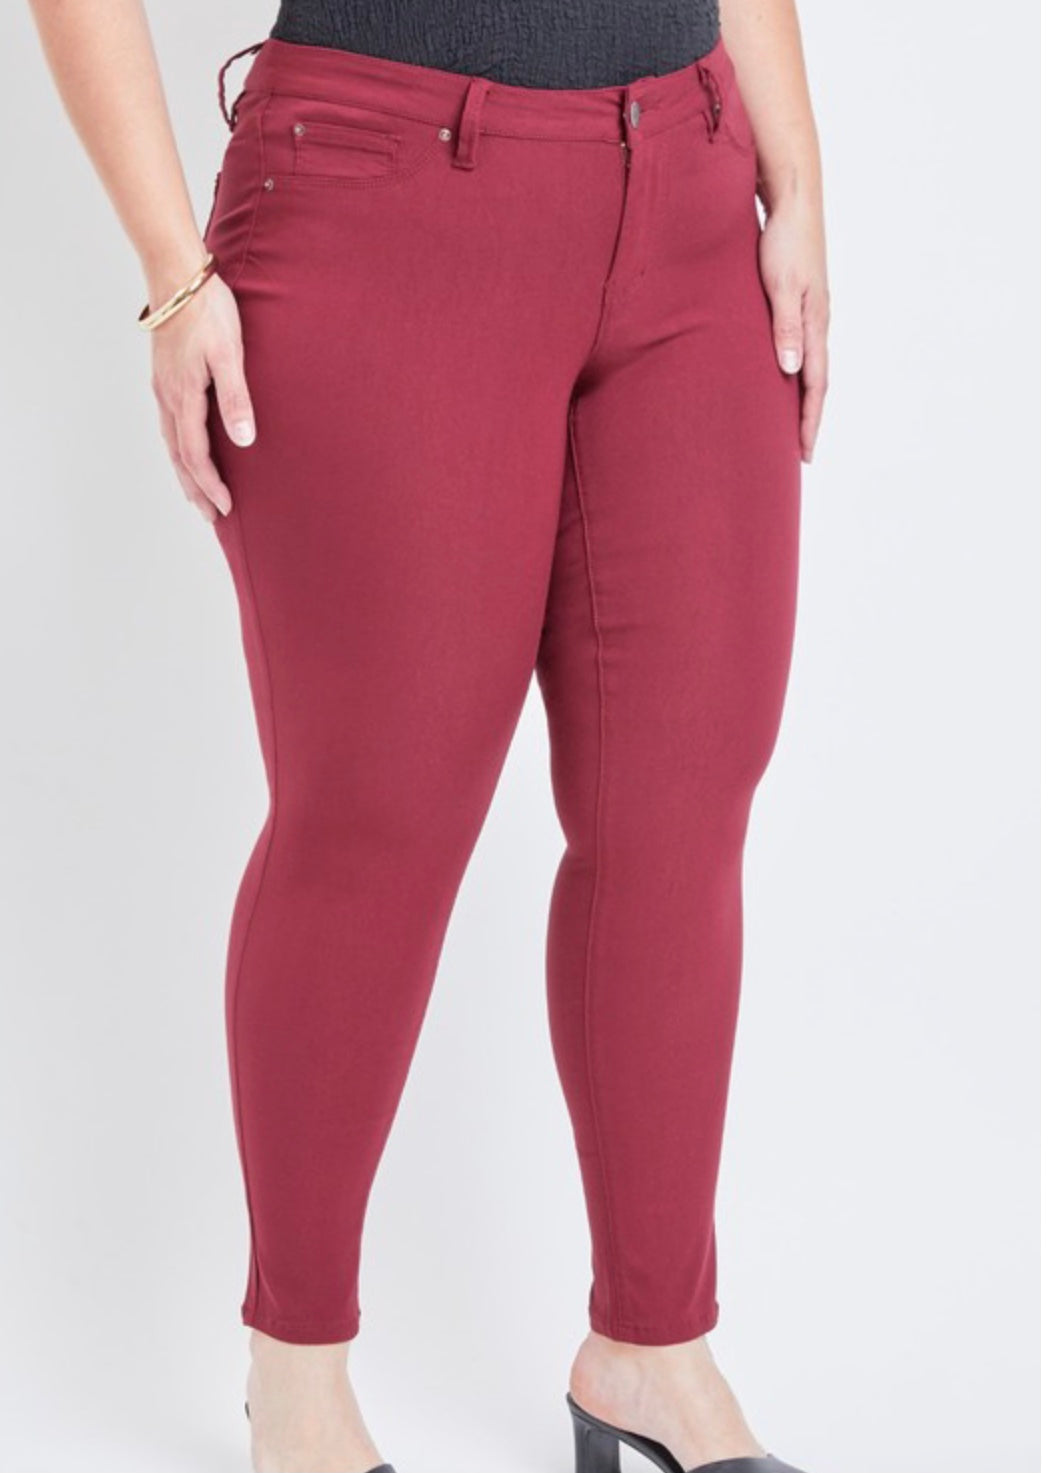 Ladies Skinny Jeggings Colored Stretchy Jeans Plus Sizes